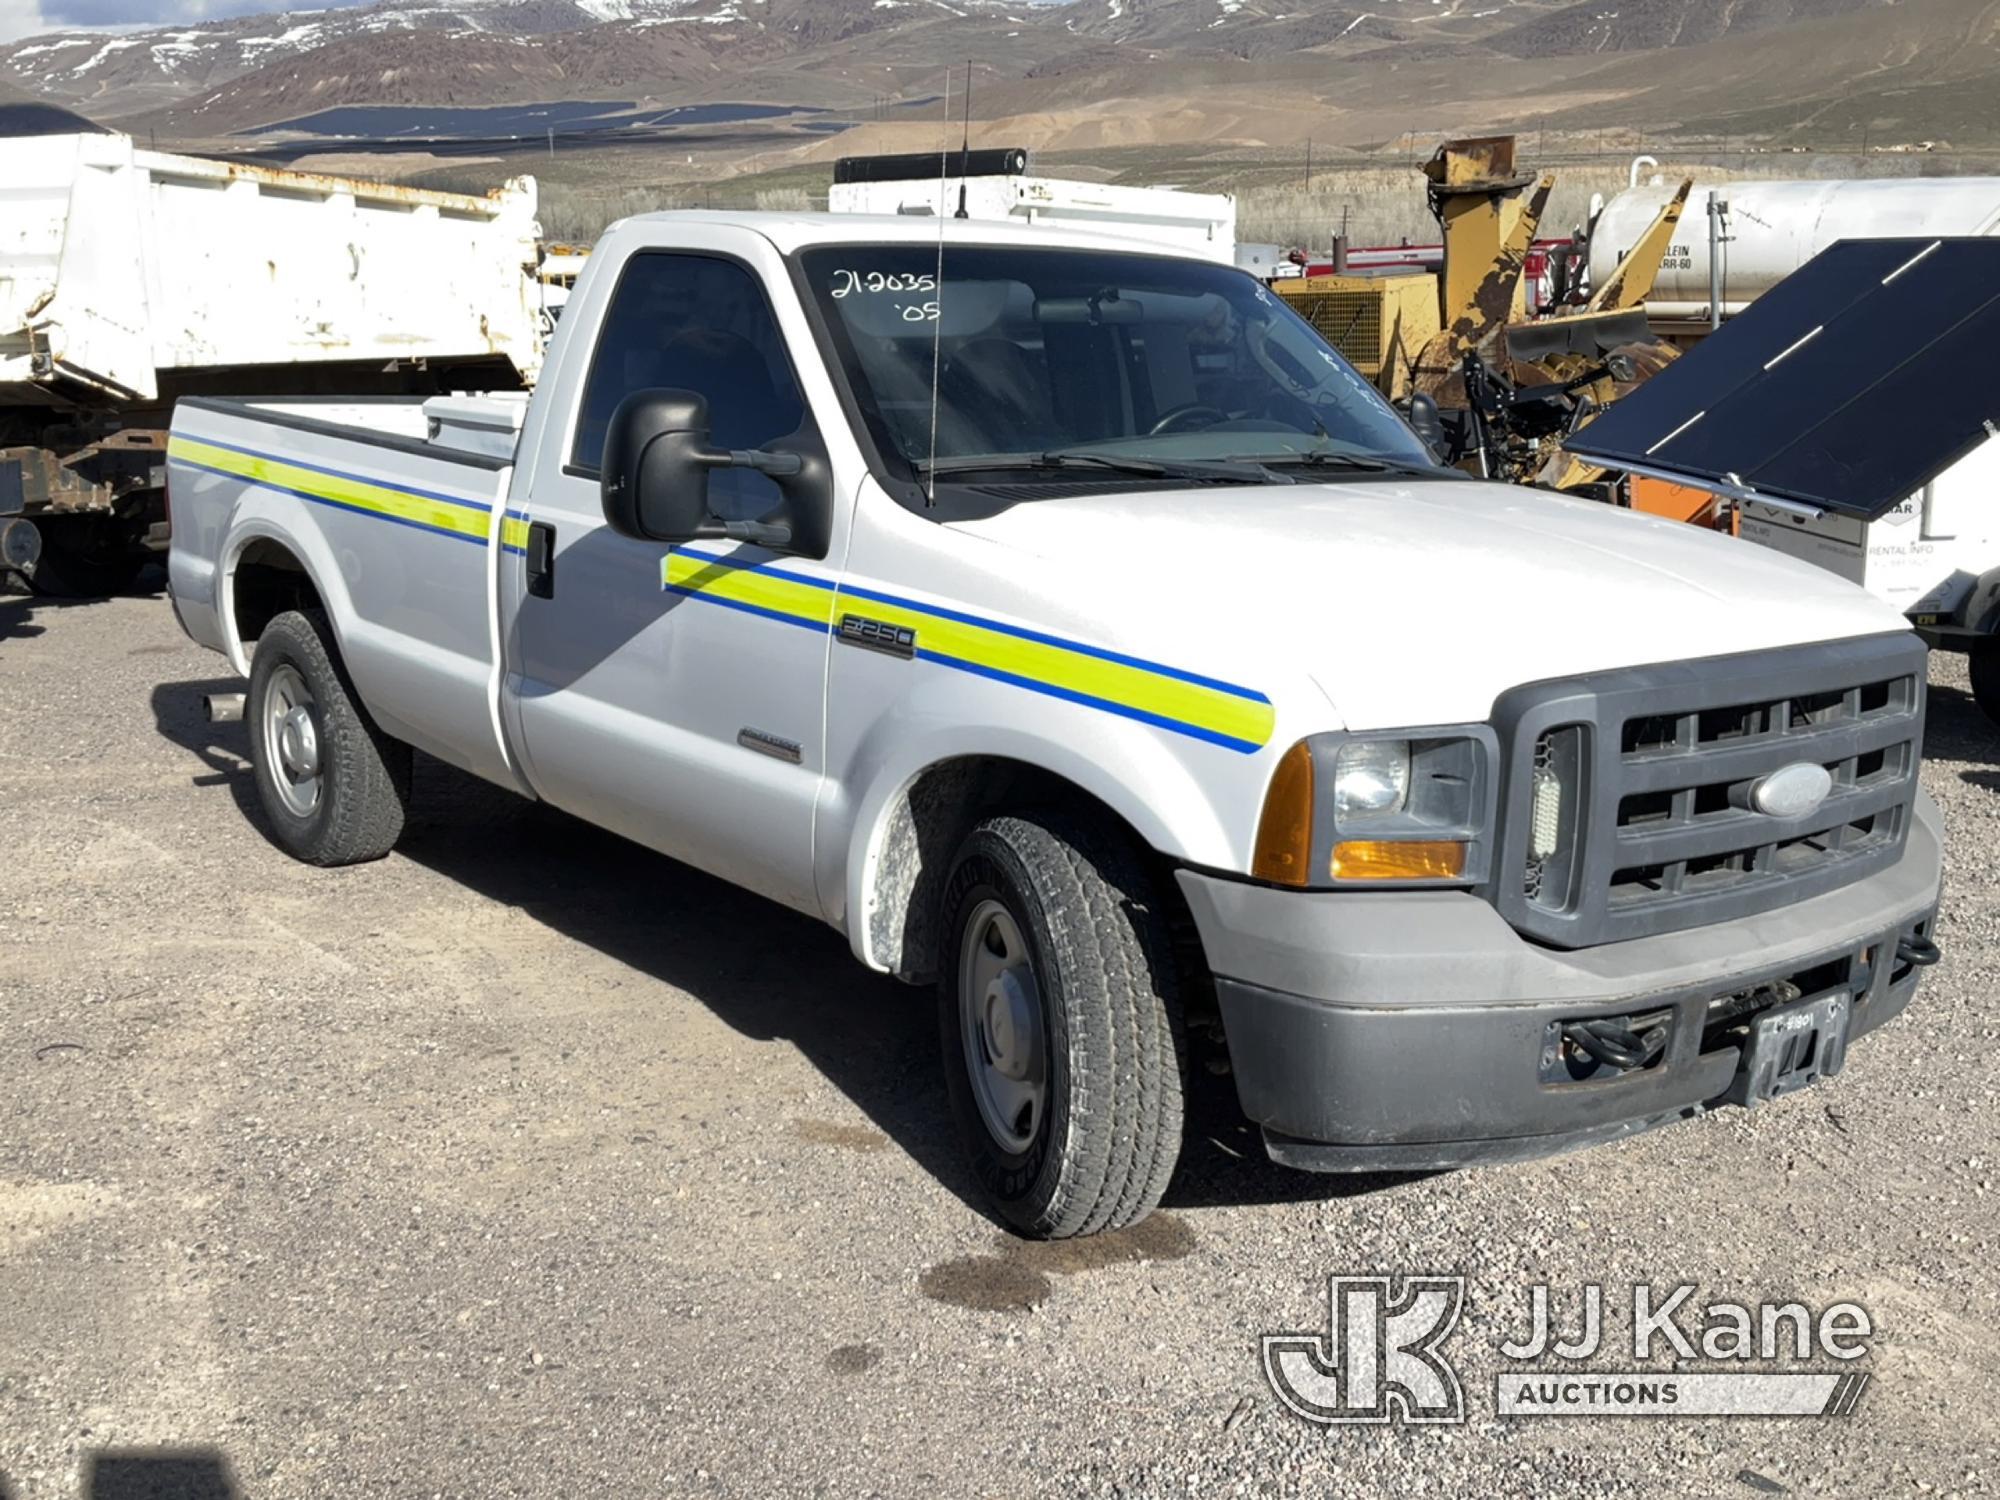 (McCarran, NV) 2005 Ford F-250 Pickup Truck, Located In Reno Nv. Contact Nathan Tiedt To Preview 775